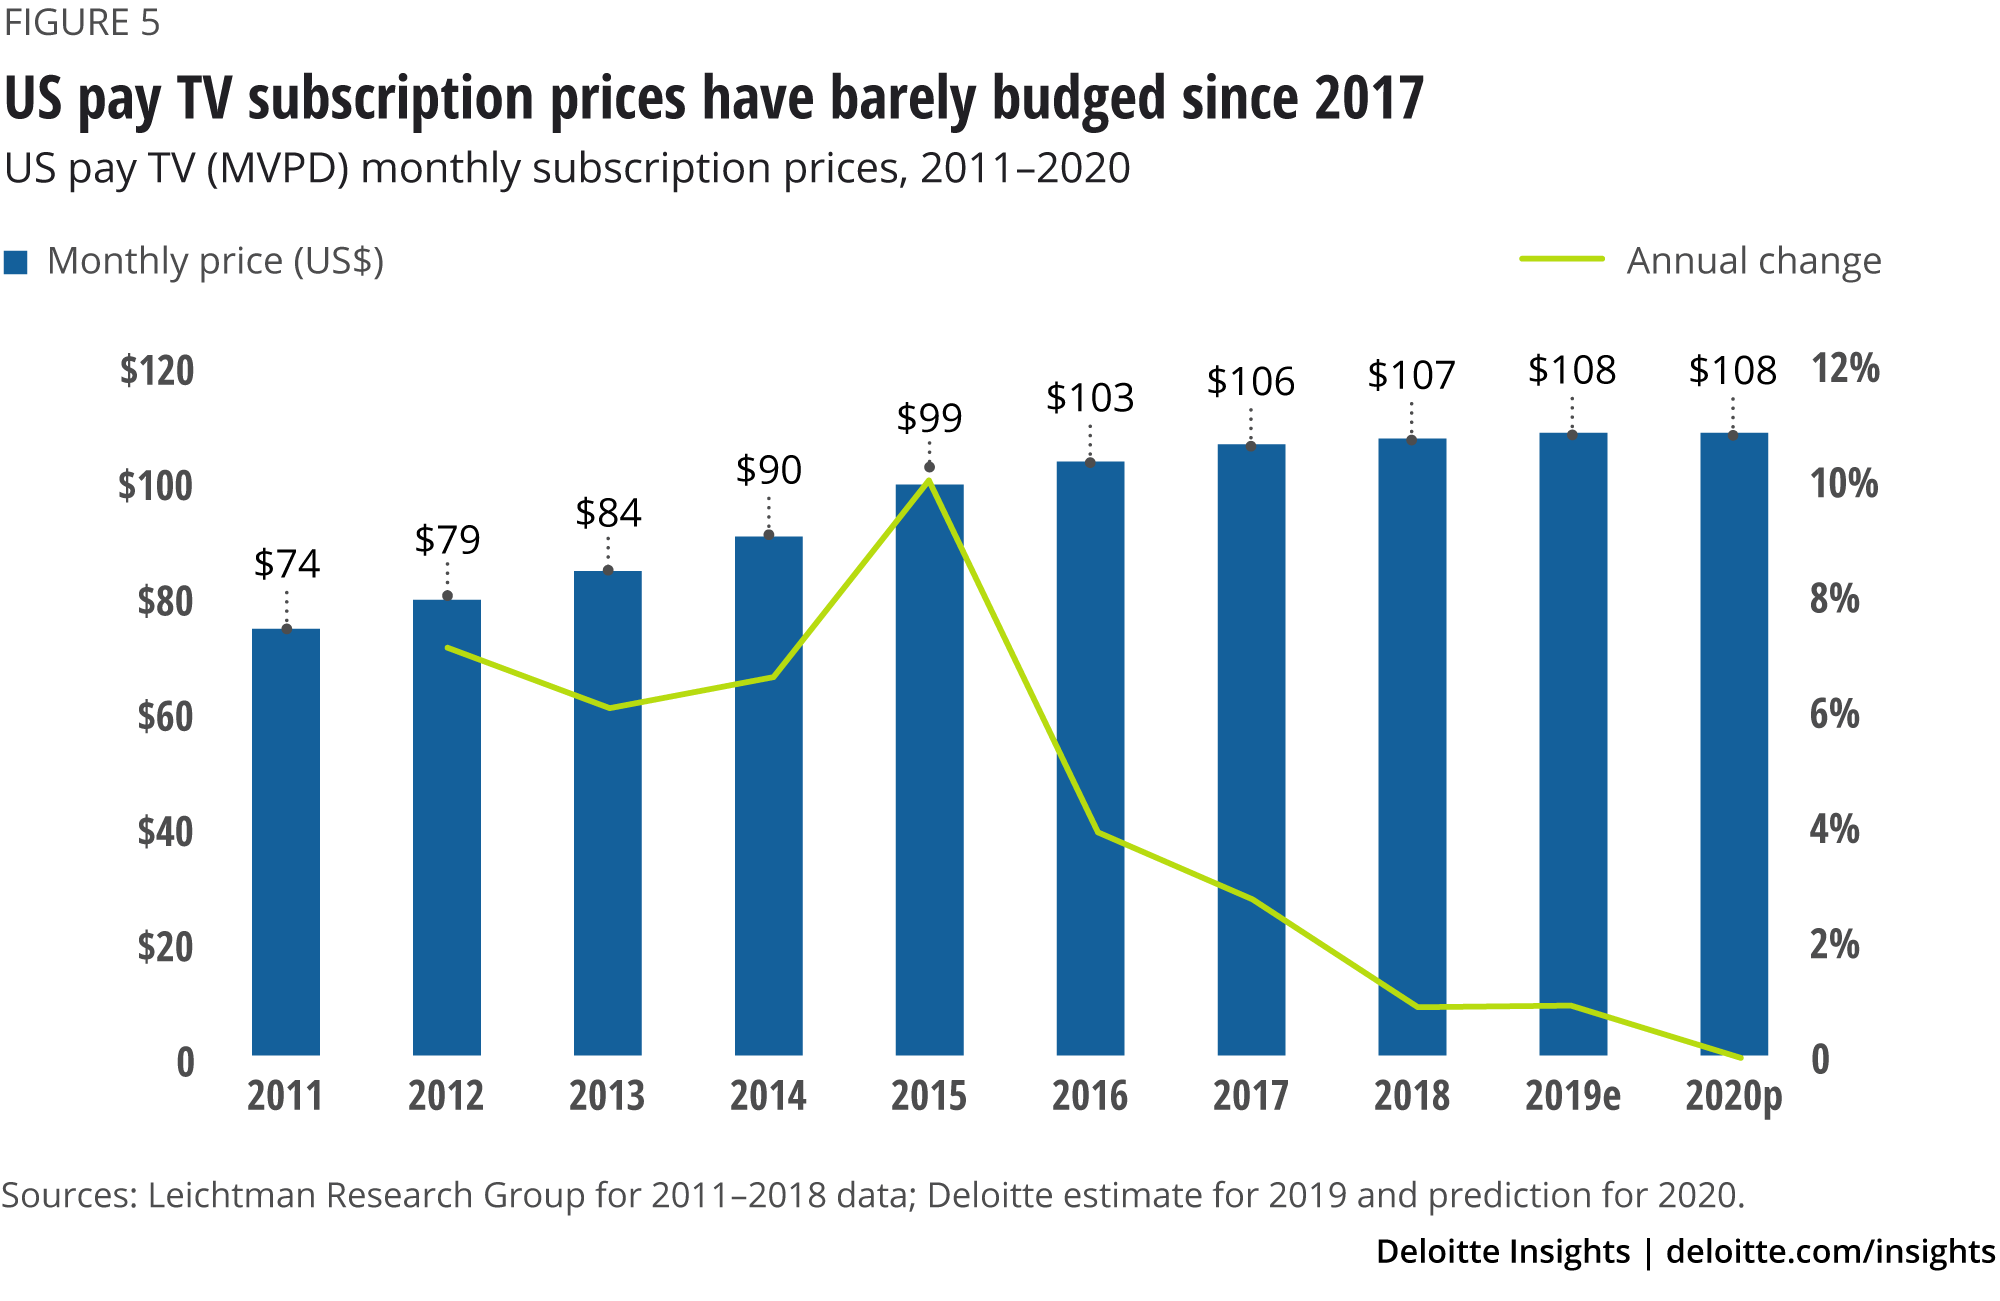 US pay TV subscription prices have barely budged since 2017